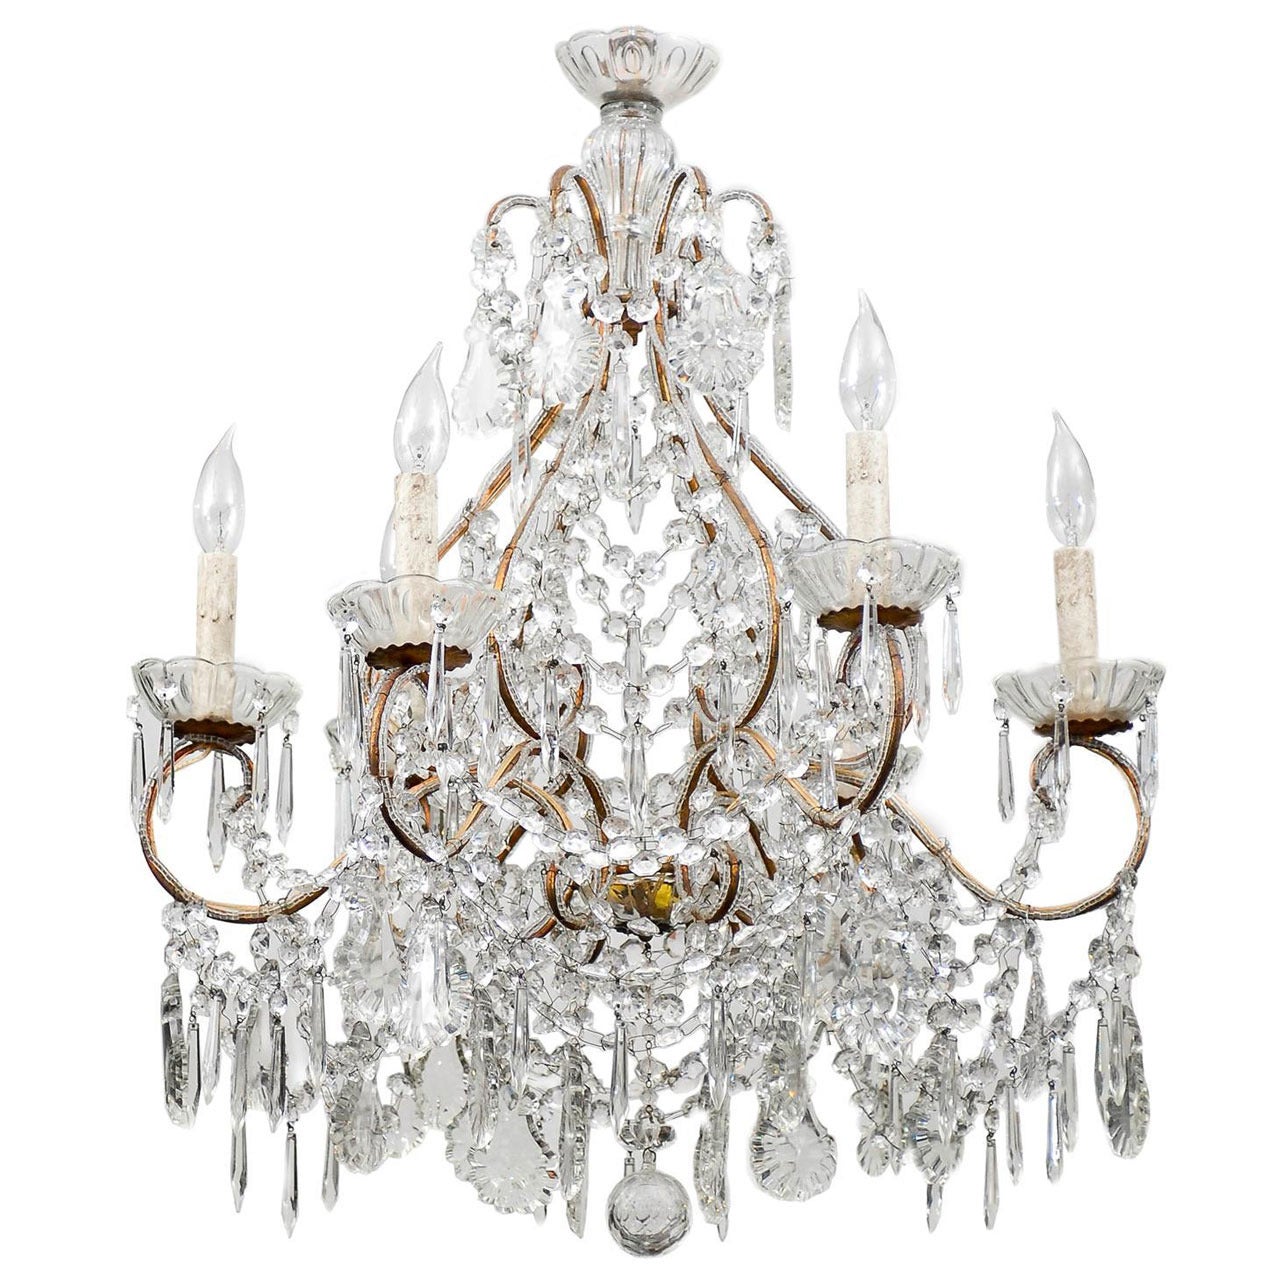 Italian Vintage Six-Light Crystal Chandelier With Scrolled Arms